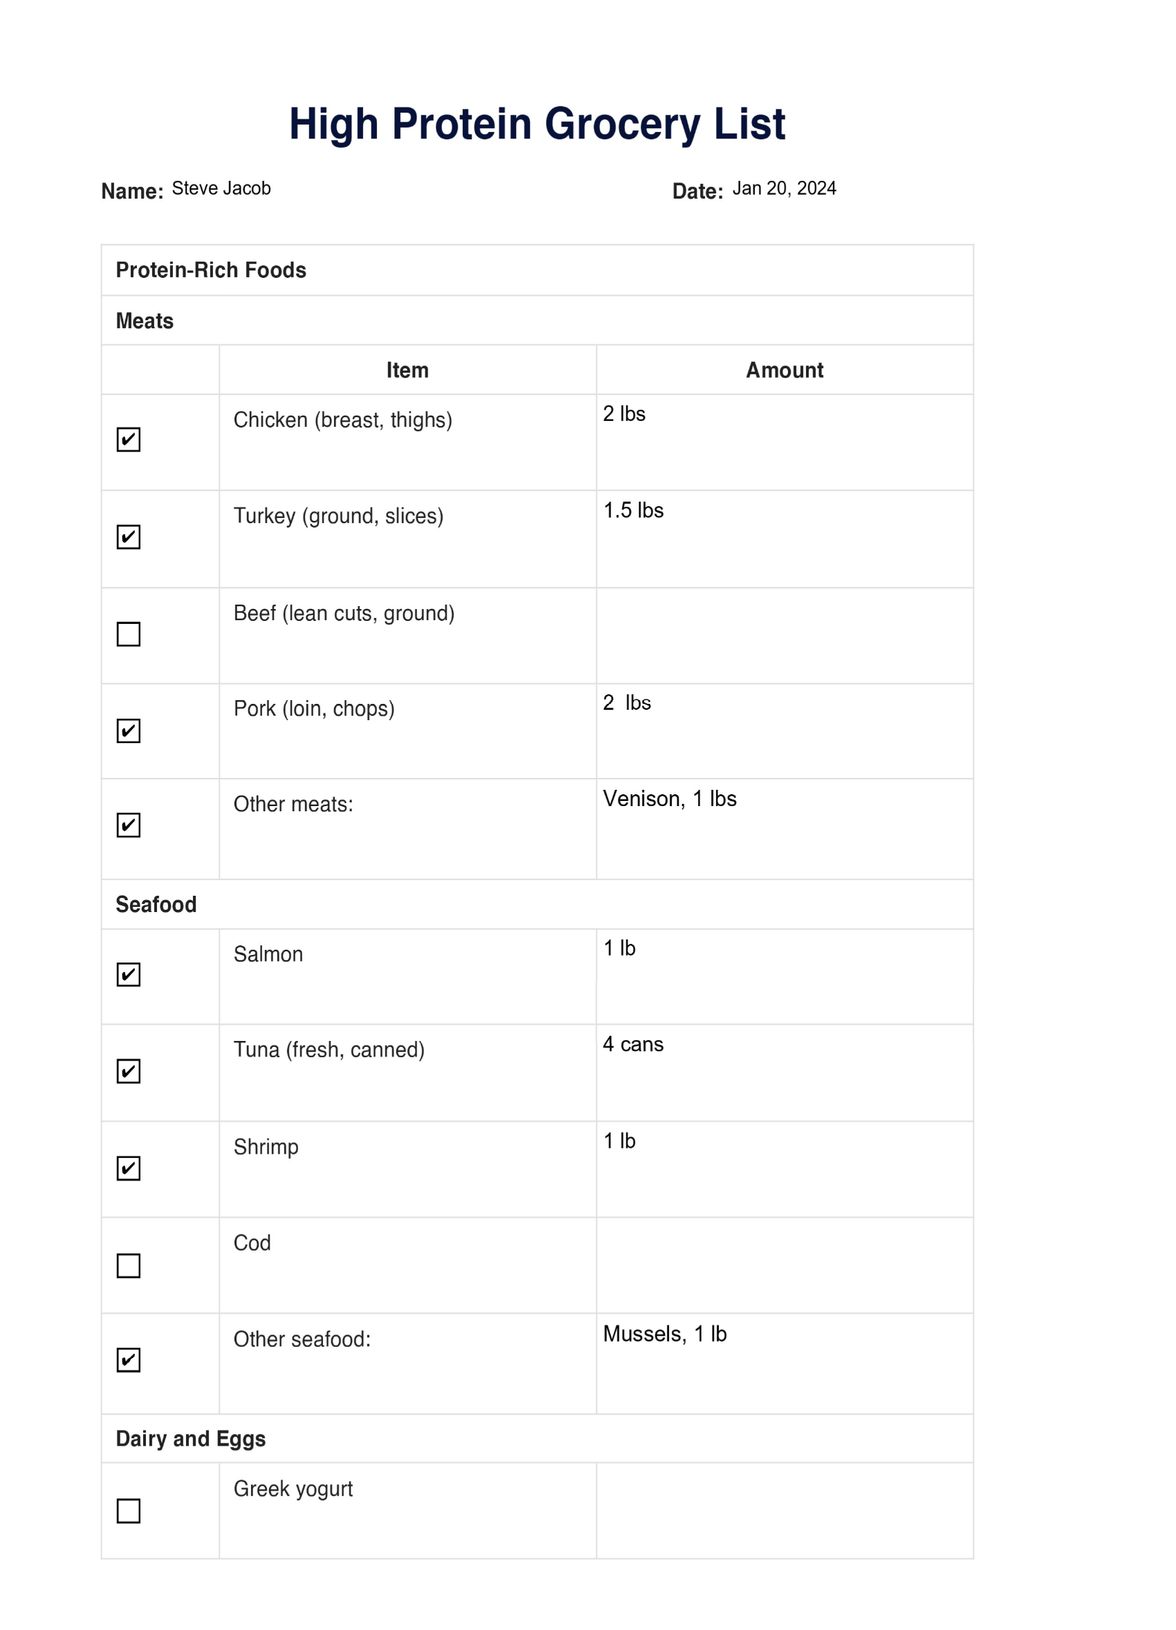 High Protein Grocery List PDF Example